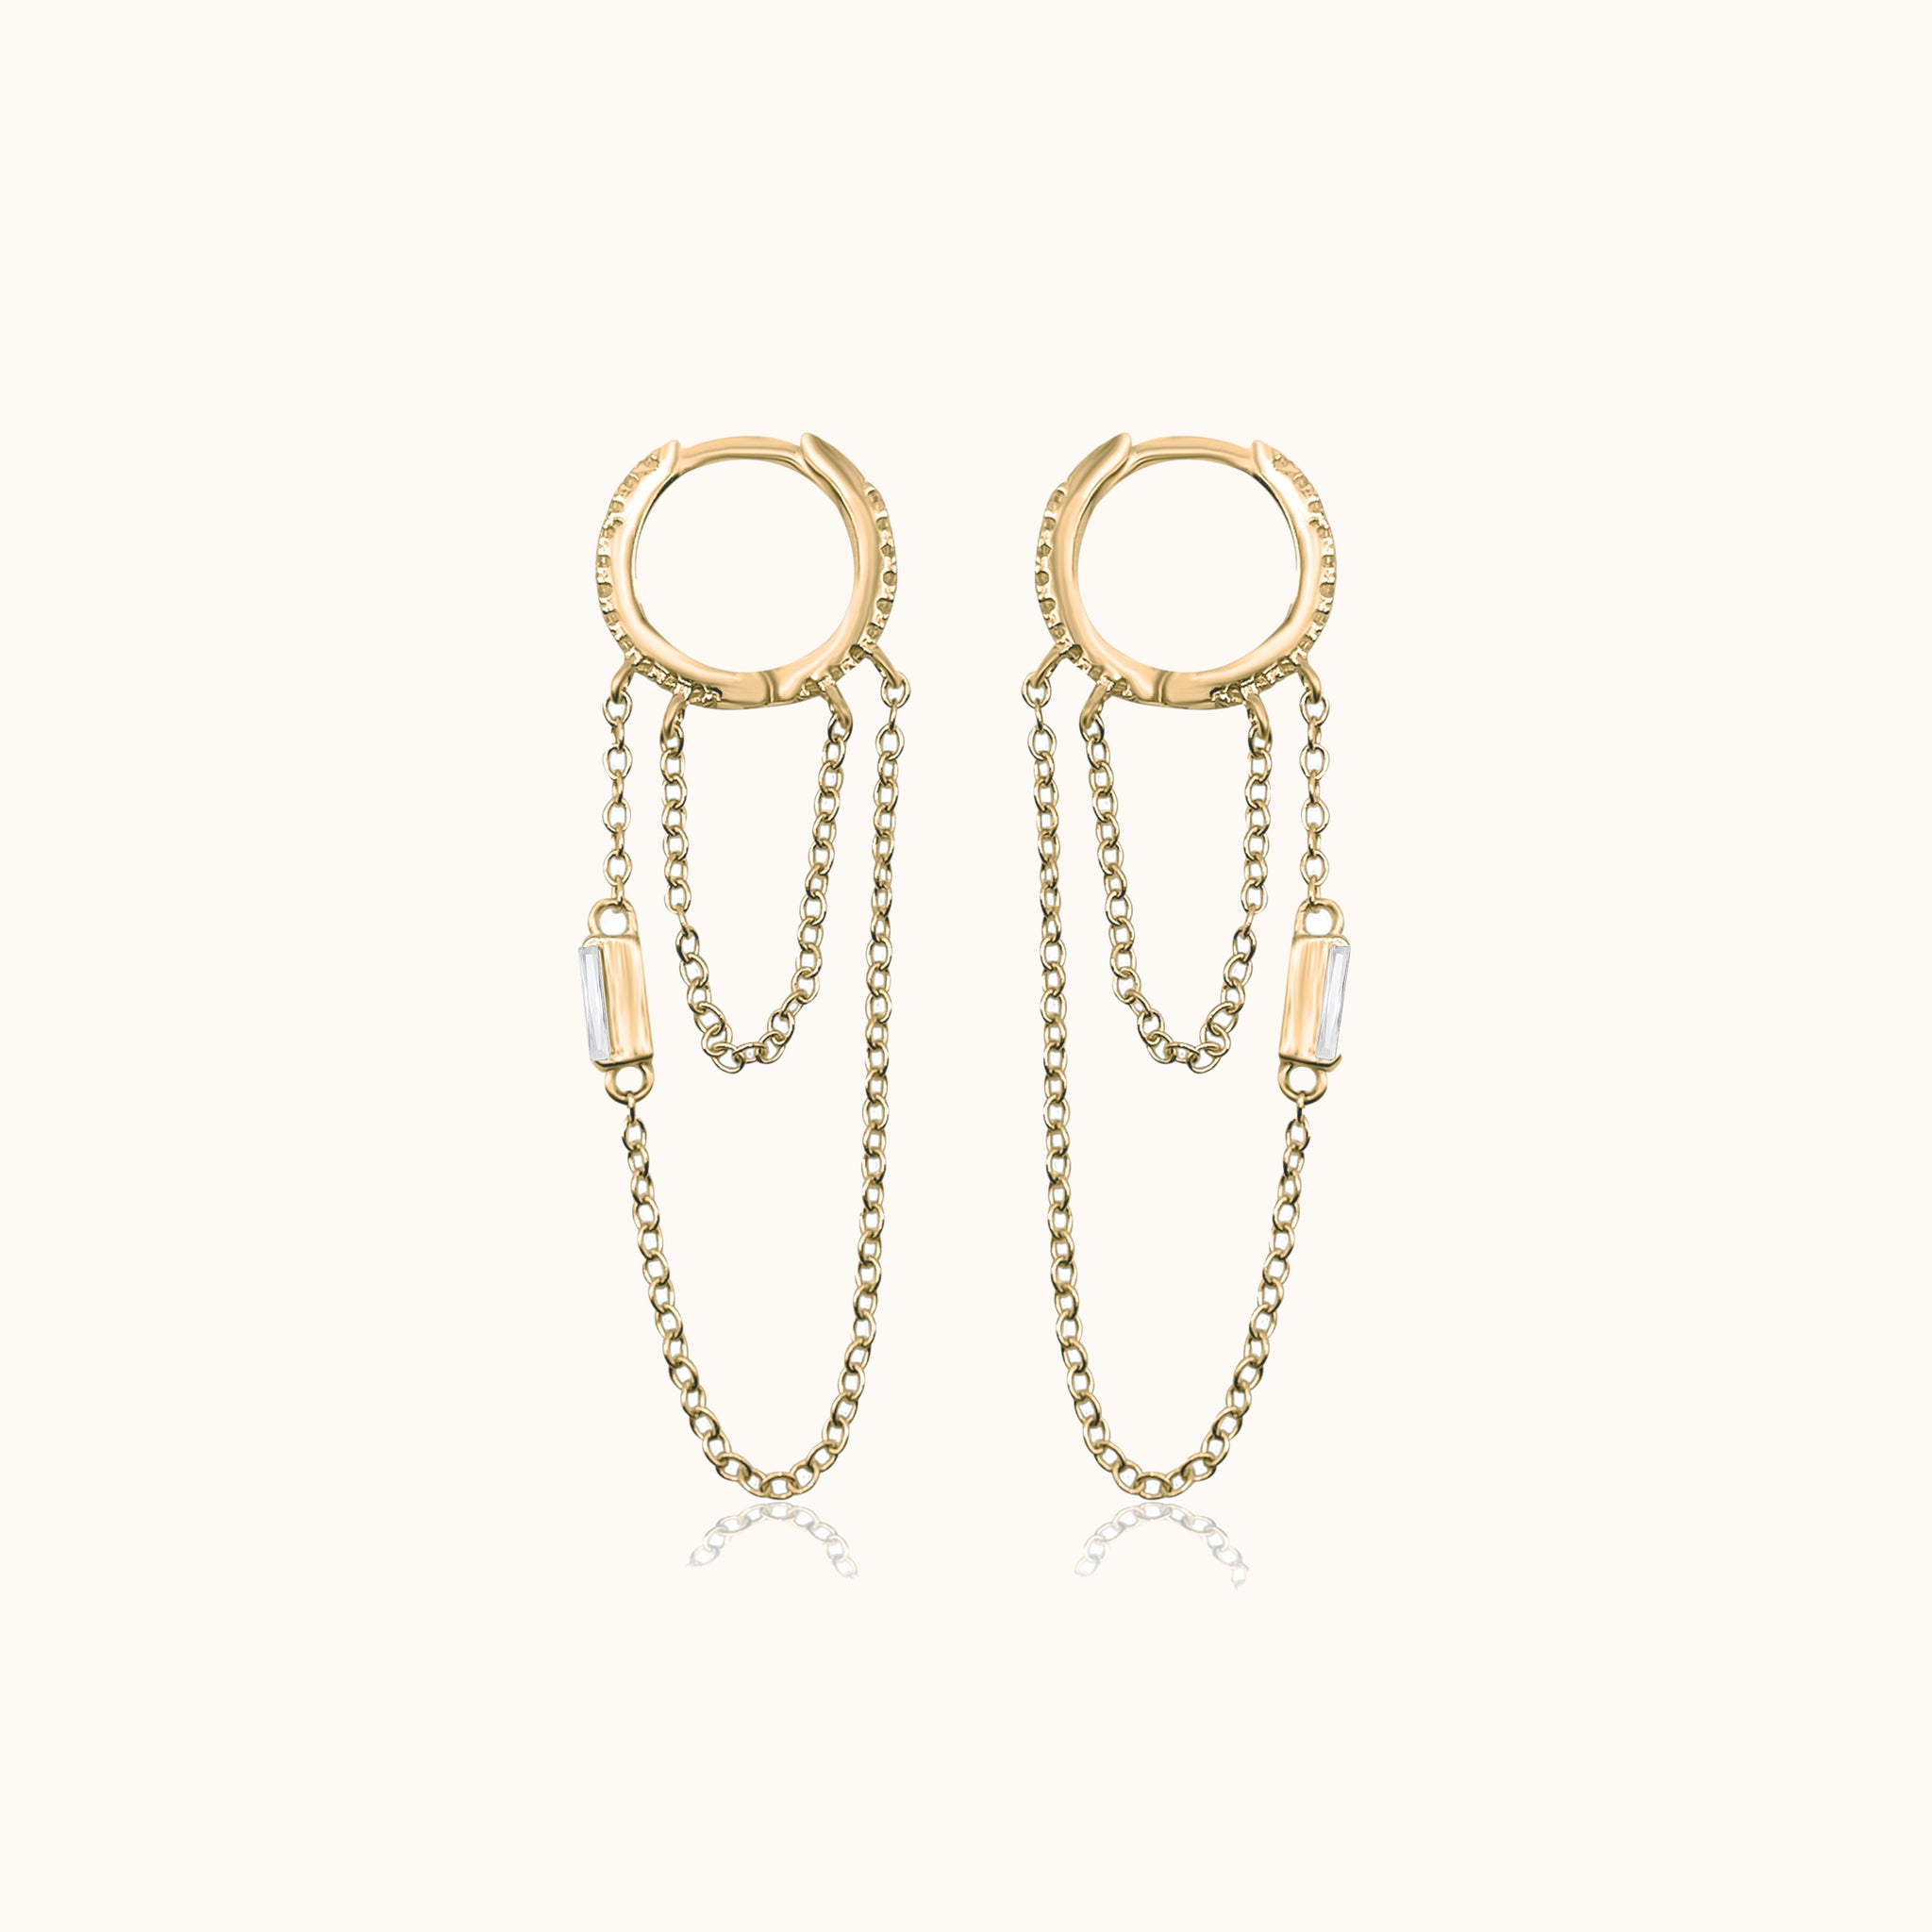 Double Layer Dangle Drop Tassel Dainty Gold Chain Hoop Earrings with White Stone by Doviana